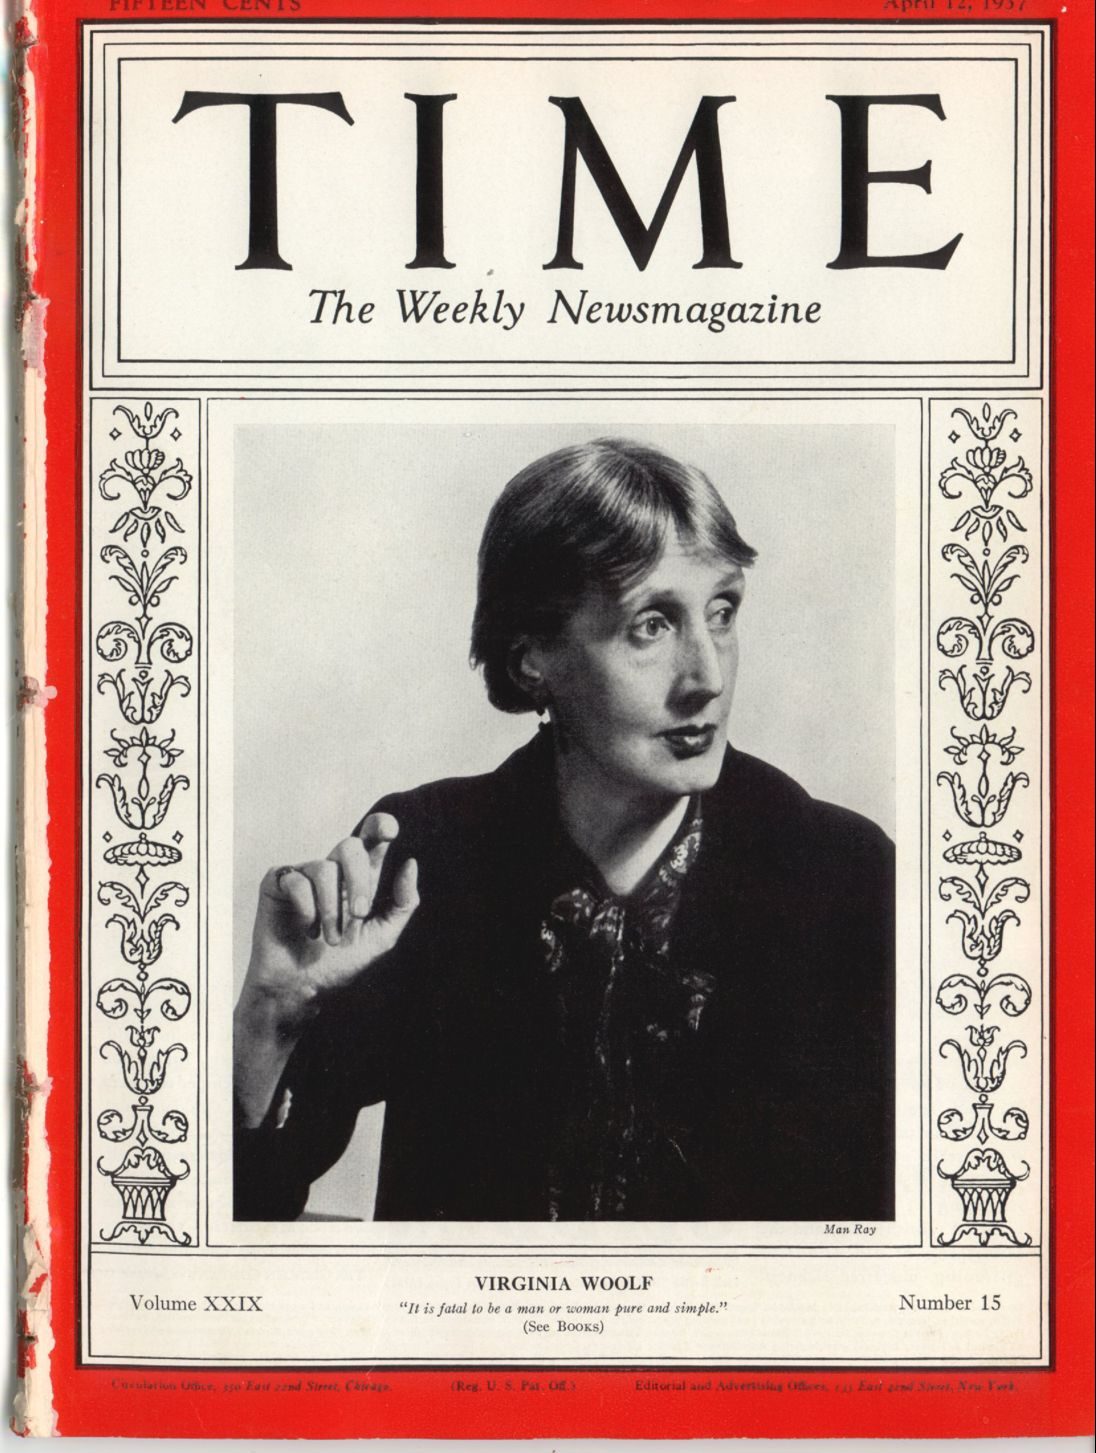 Virginia Woolf on the cover of TIME's April 12, 1937 issue